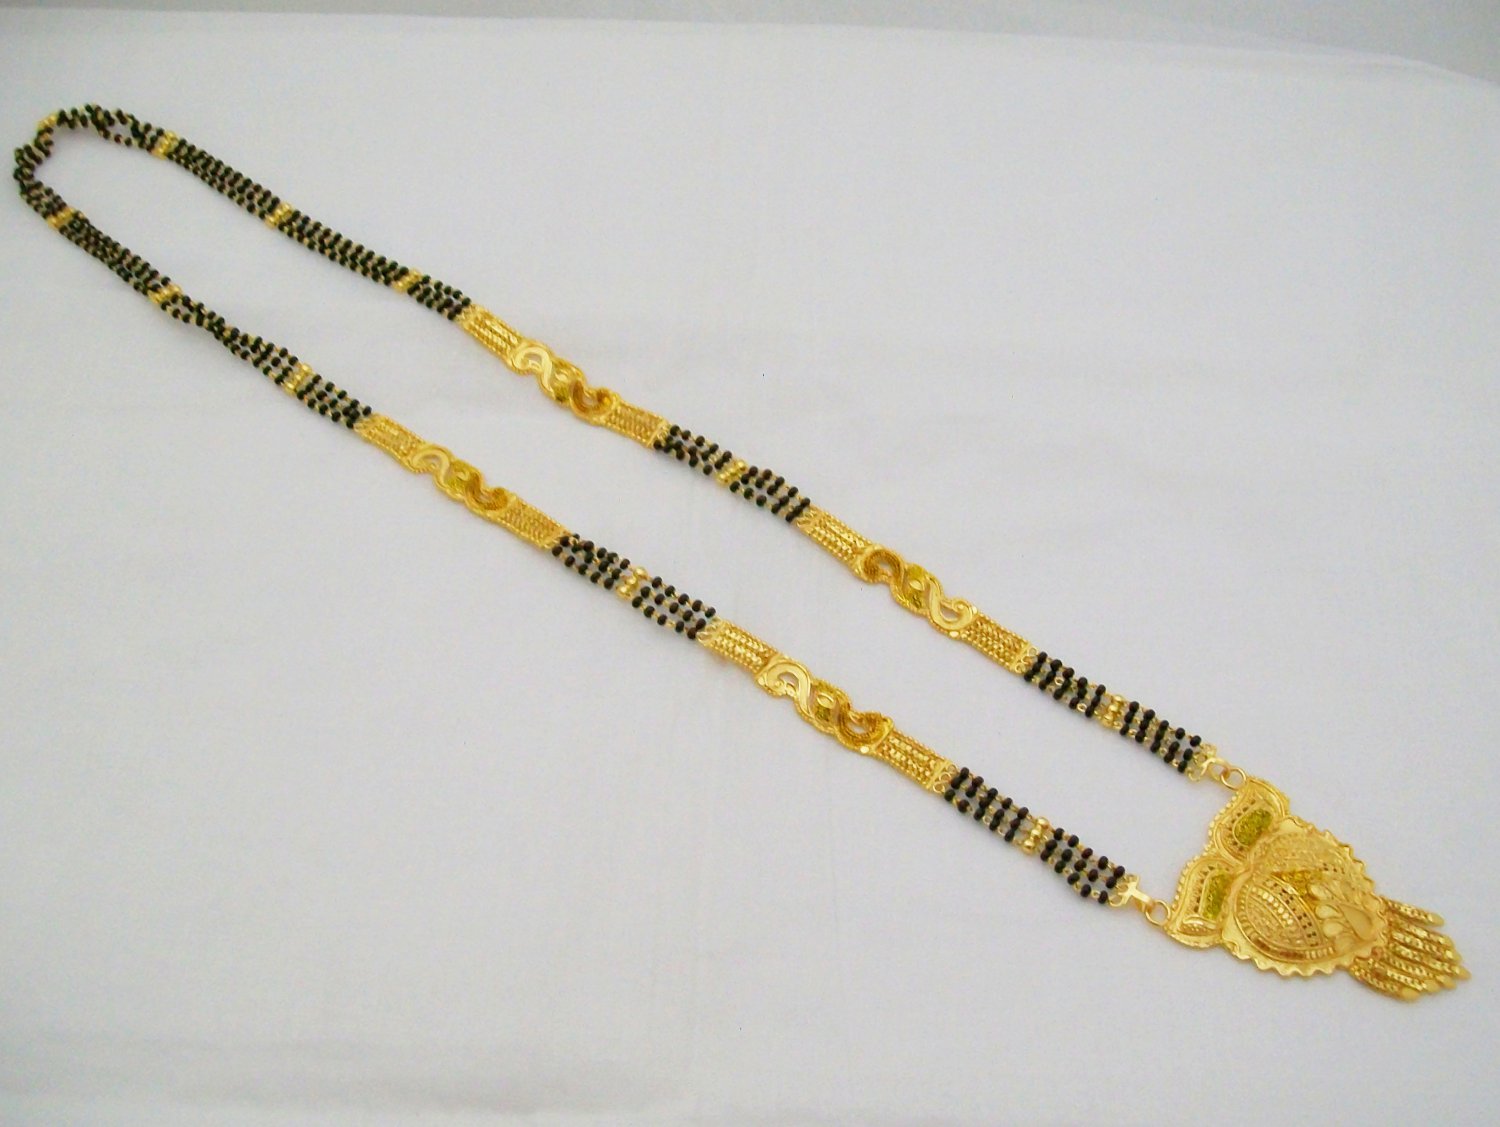 22k Gold Plated Mangalsutra Traditional Design Black Bead Jewellery India 